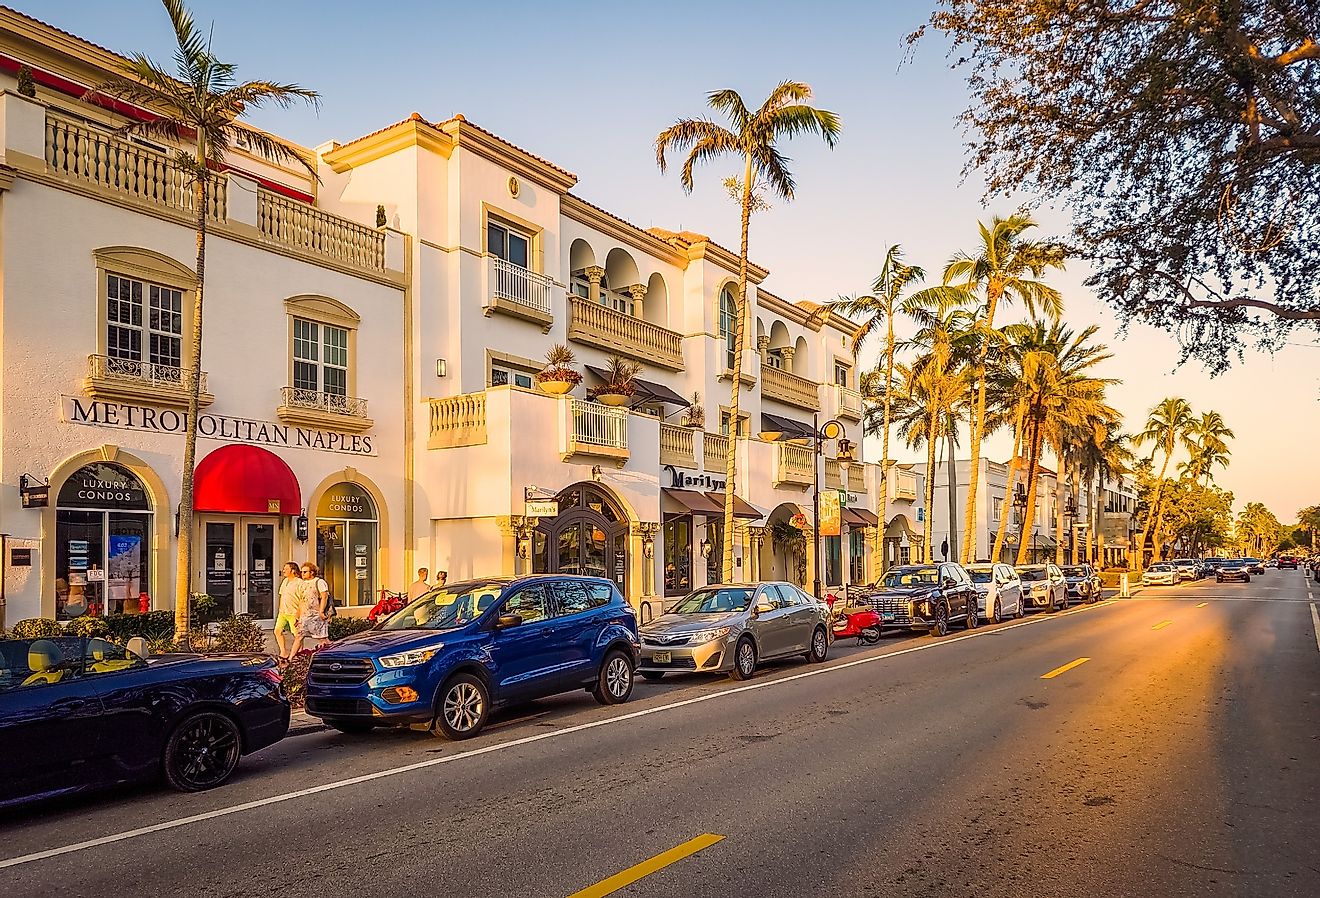 View of 5th avenue at sunset in Naples, Florida. Image credit Mihai_Andritoiu via Shutterstock